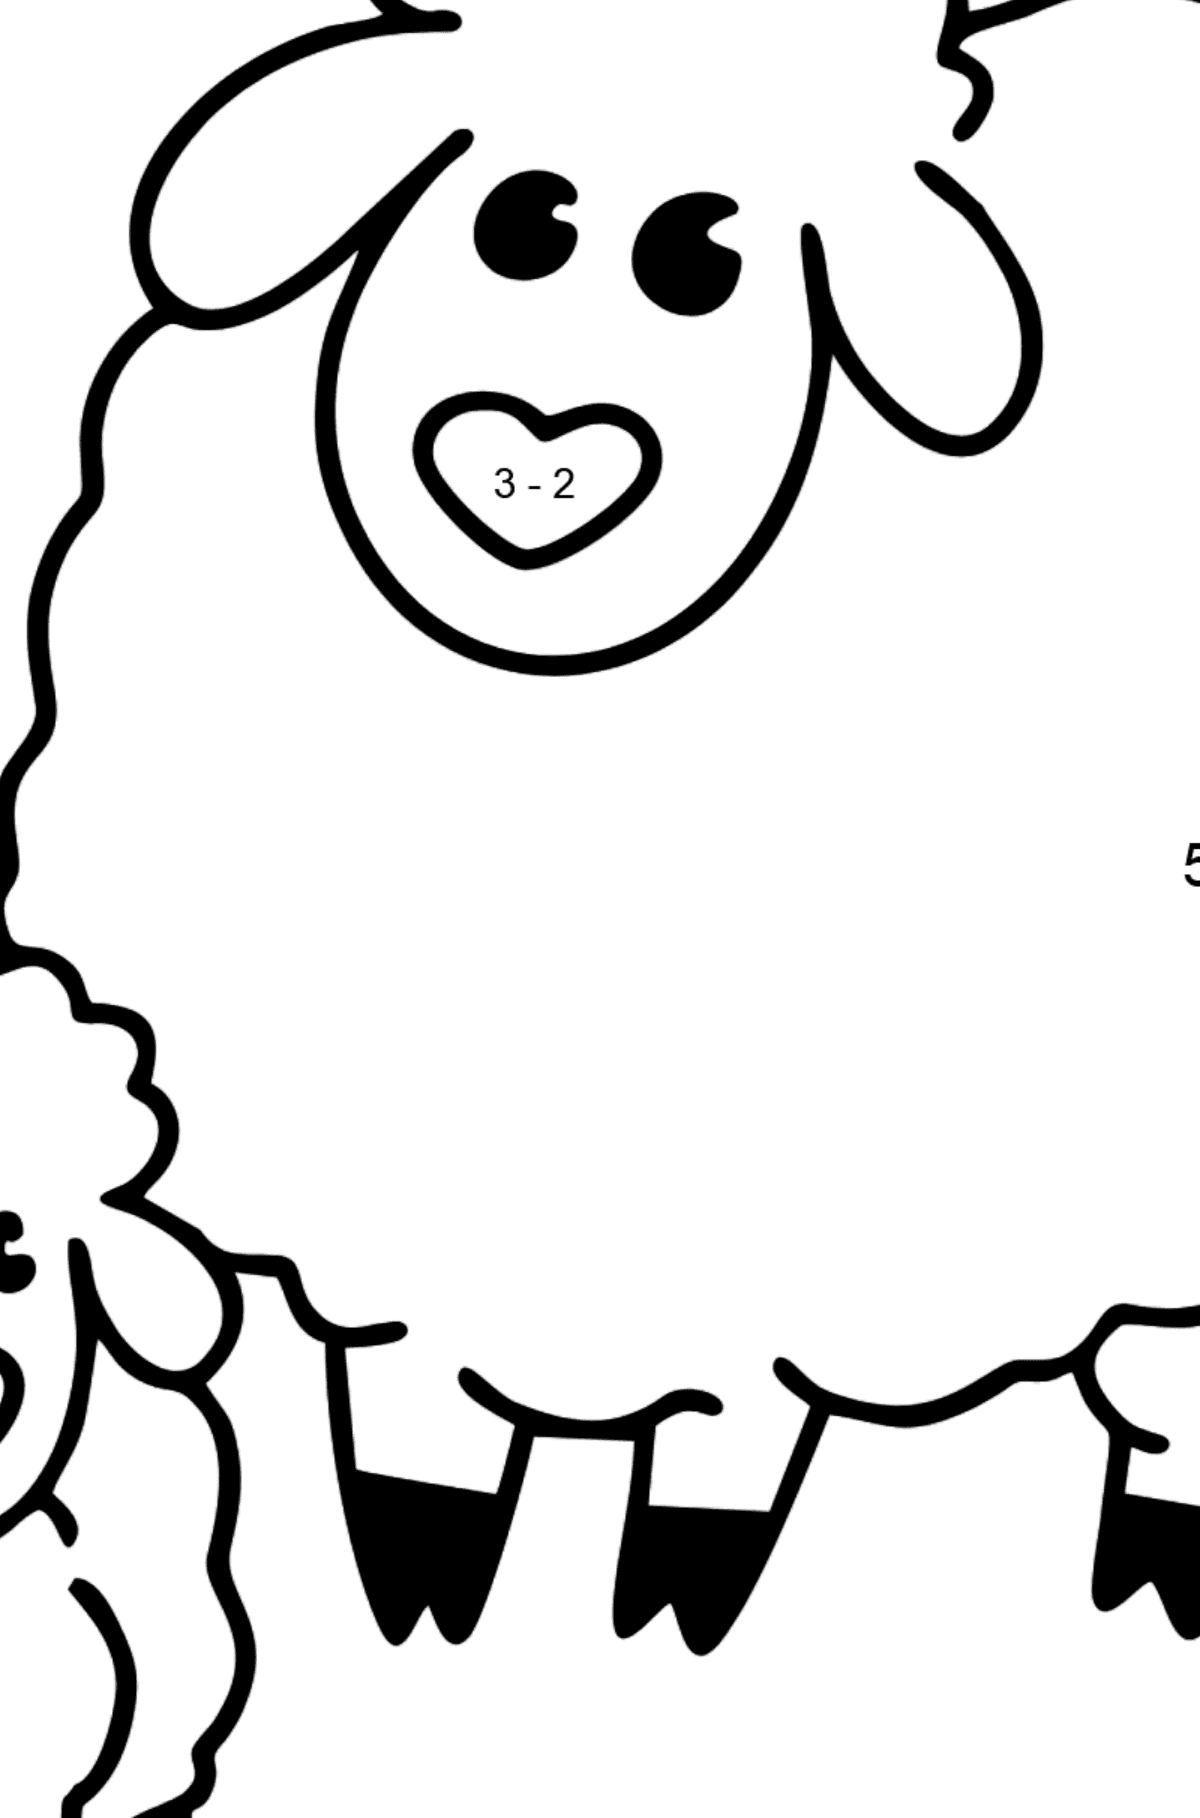 Sheep with Lamb coloring page - Math Coloring - Subtraction for Kids